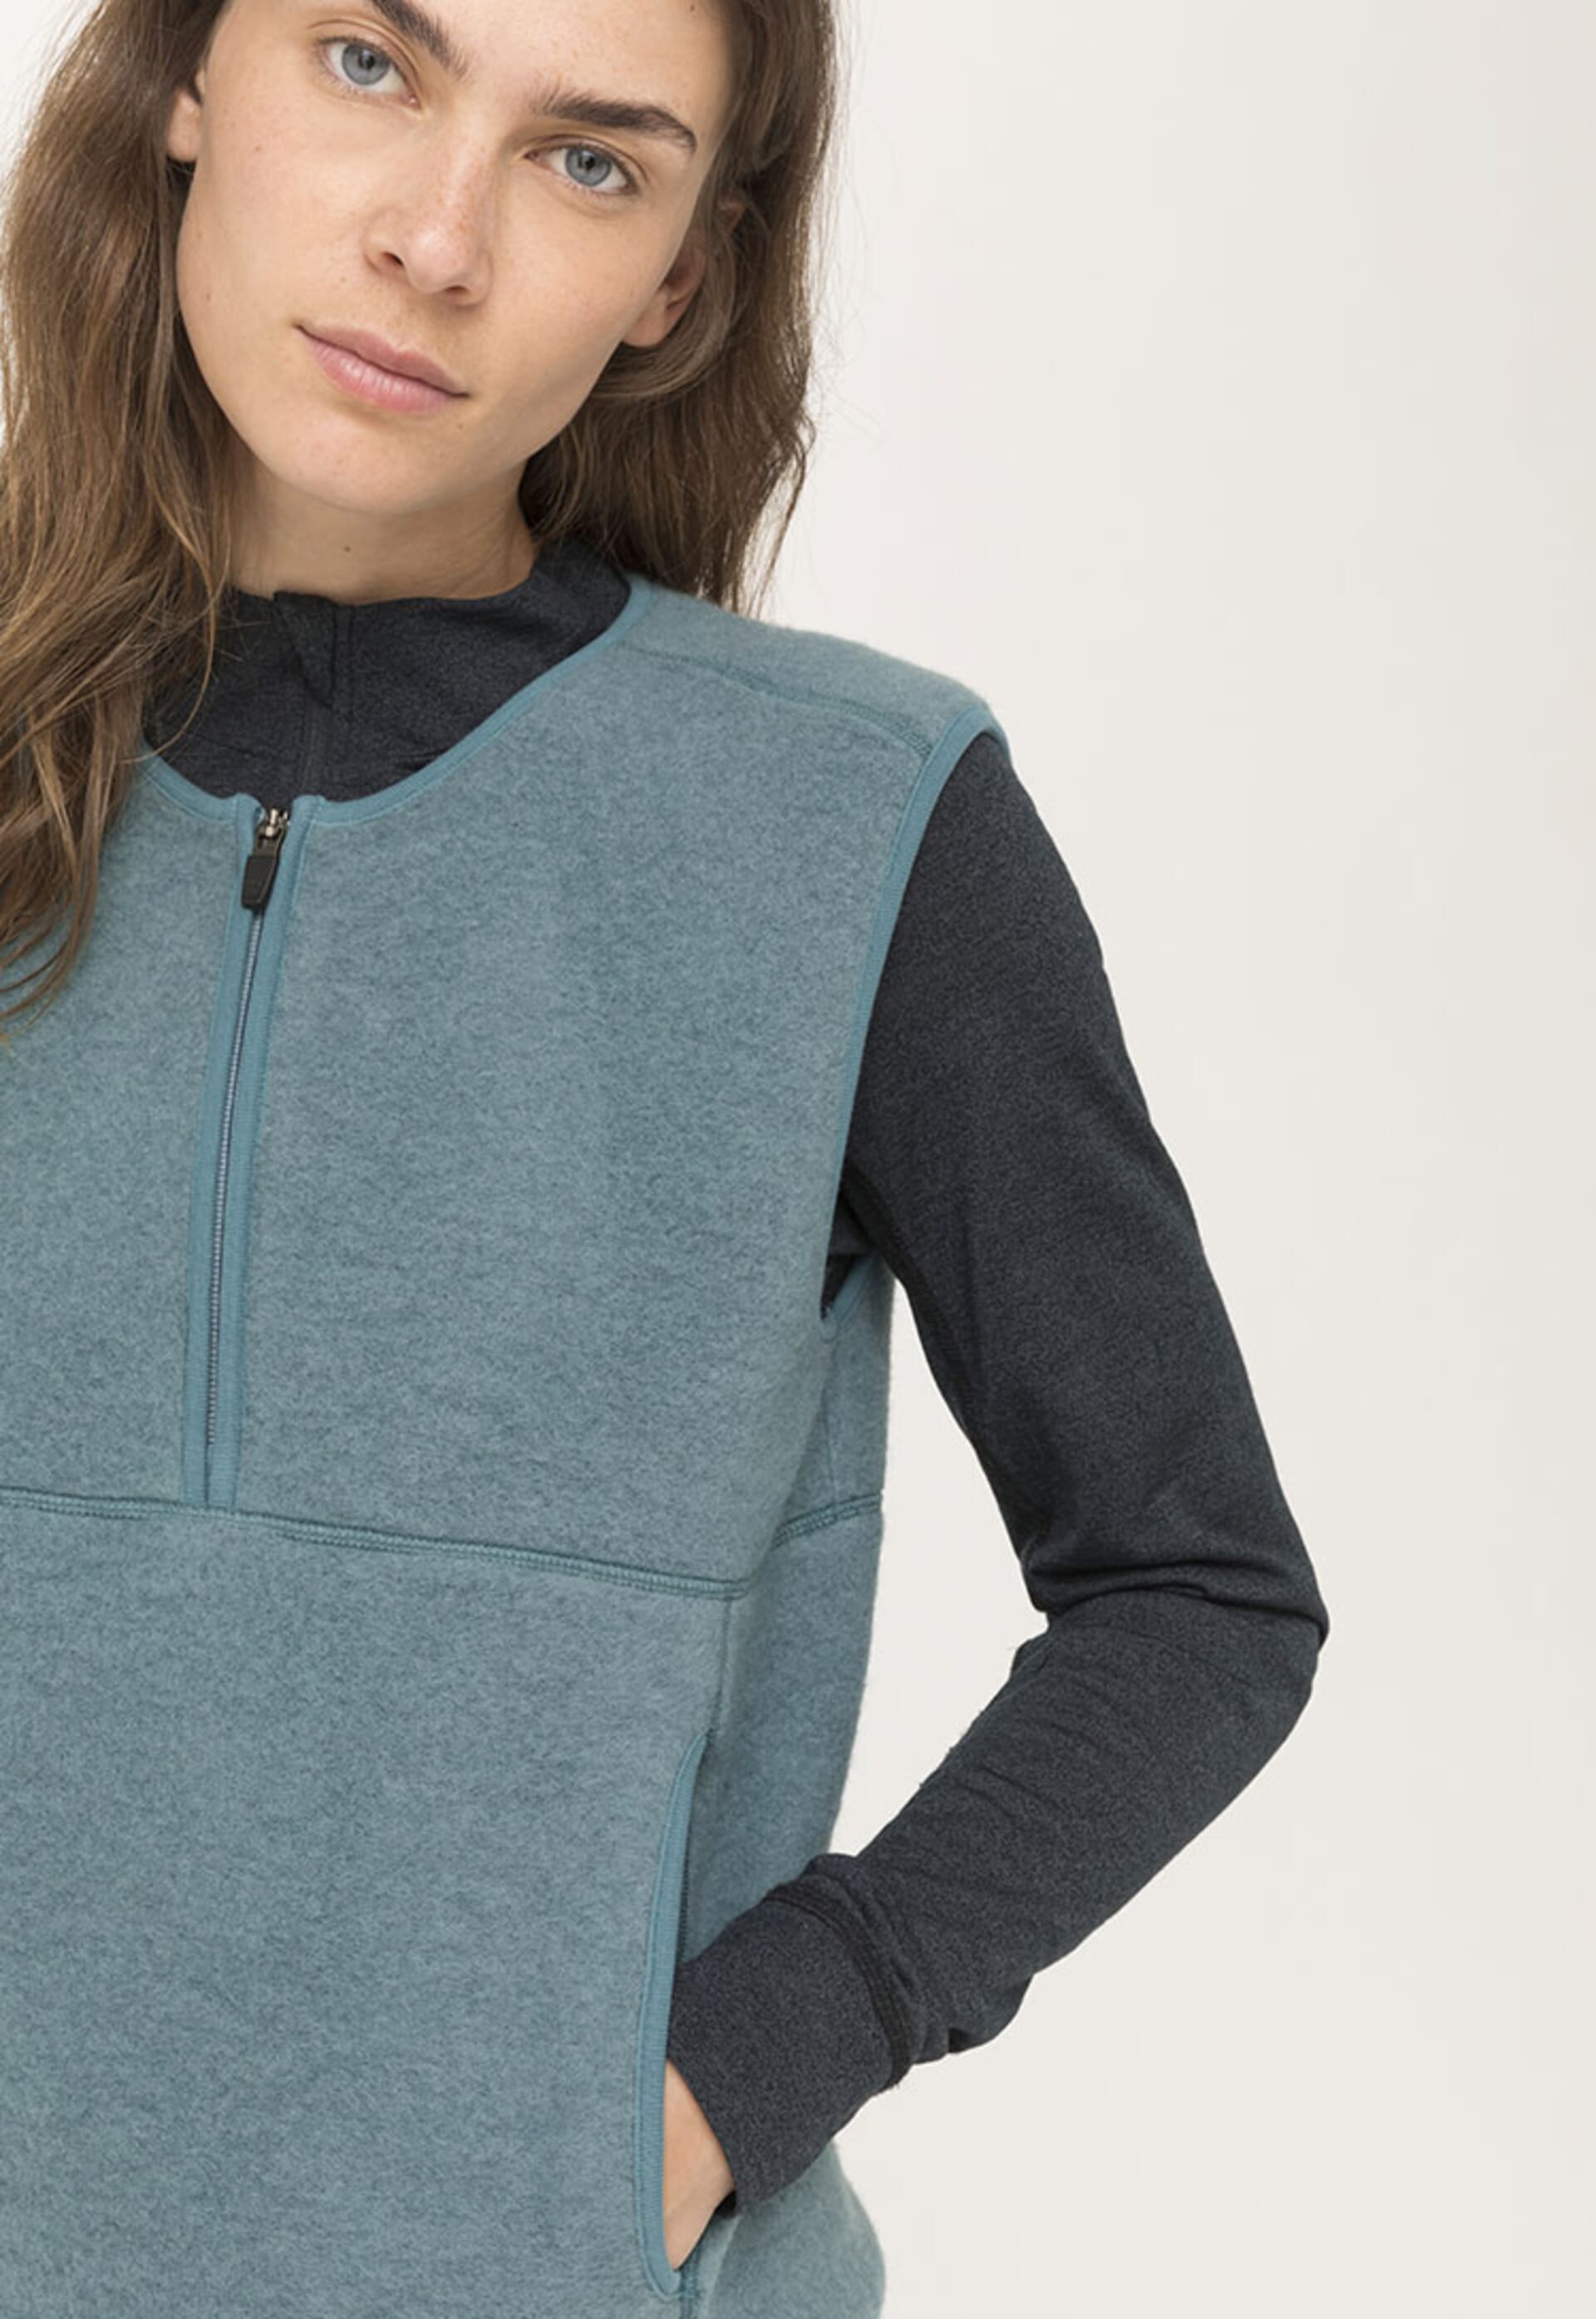 Highly functional and warming: wool fleece made from organic merino.